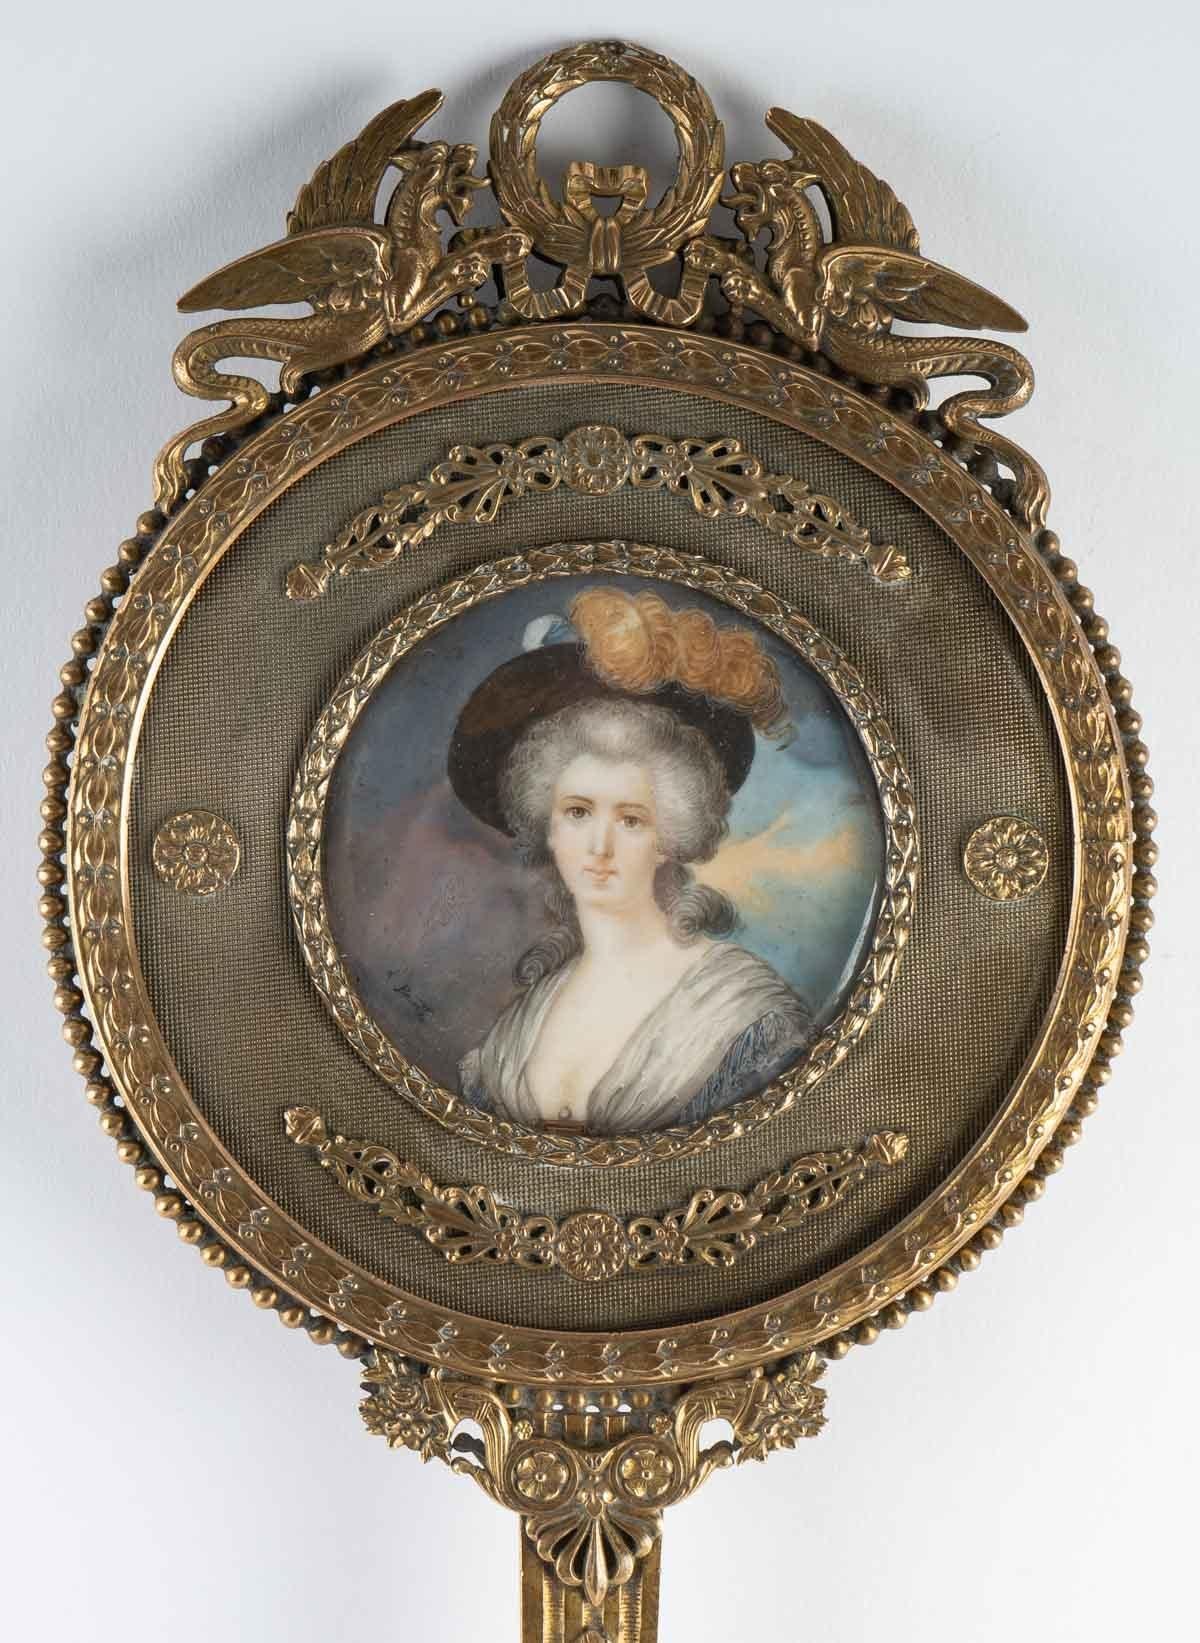 Superb gilt bronze mirror, 19th century, richly carved. It contains a miniature representing a lady of the court.

Parisian work from the end of the 19th century.
Measures: Diameter 34 cm, height 14 cm.